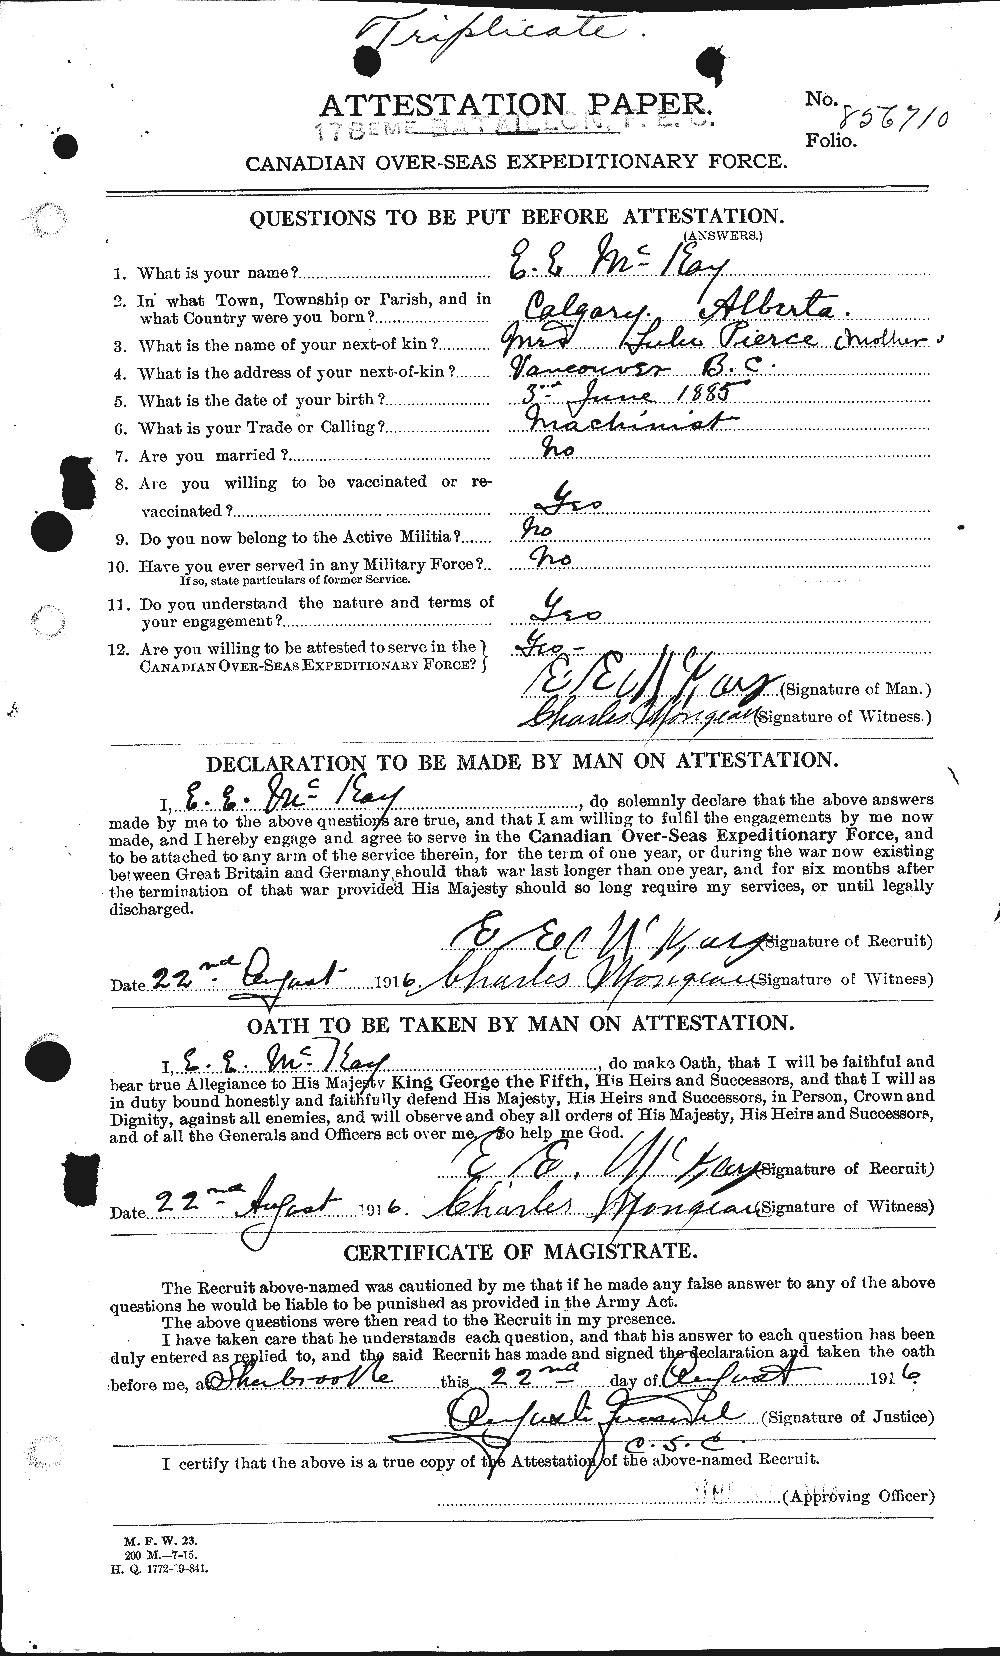 Personnel Records of the First World War - CEF 534554a